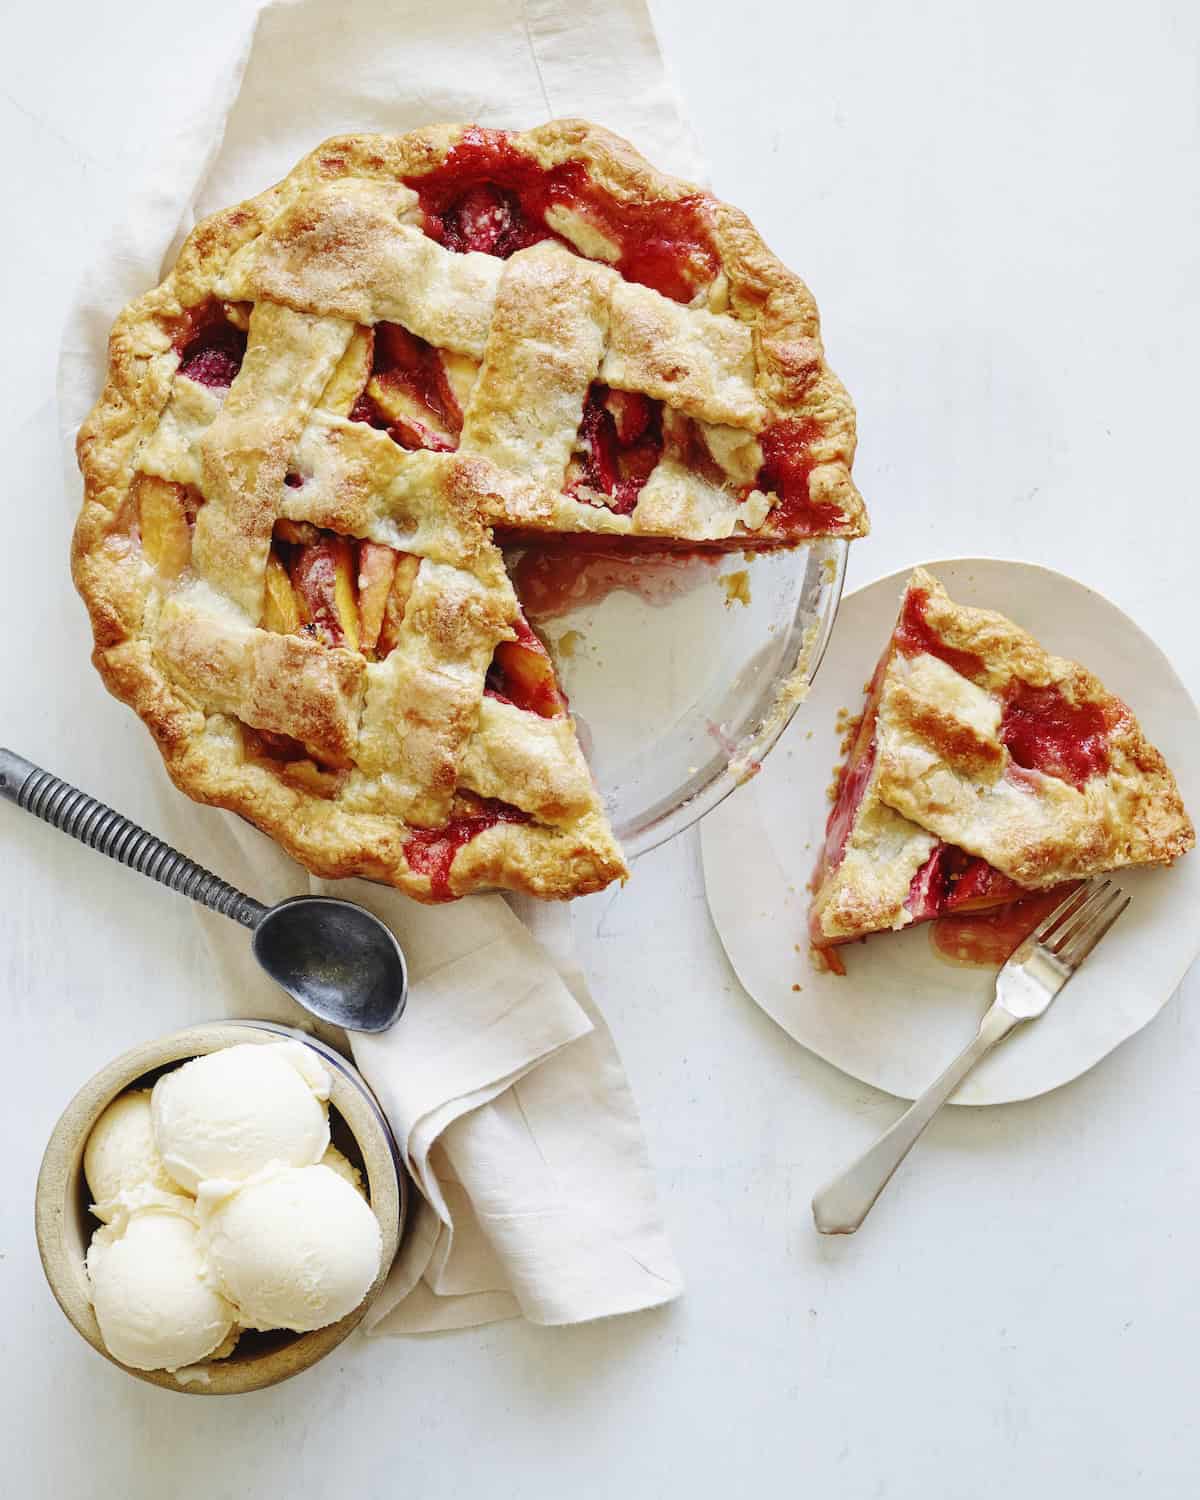 A strawberry peach pie with a lattice top, with a slice cut and placed on a plate on the side, and a bowl with vanilla ice cream scoops on the side.